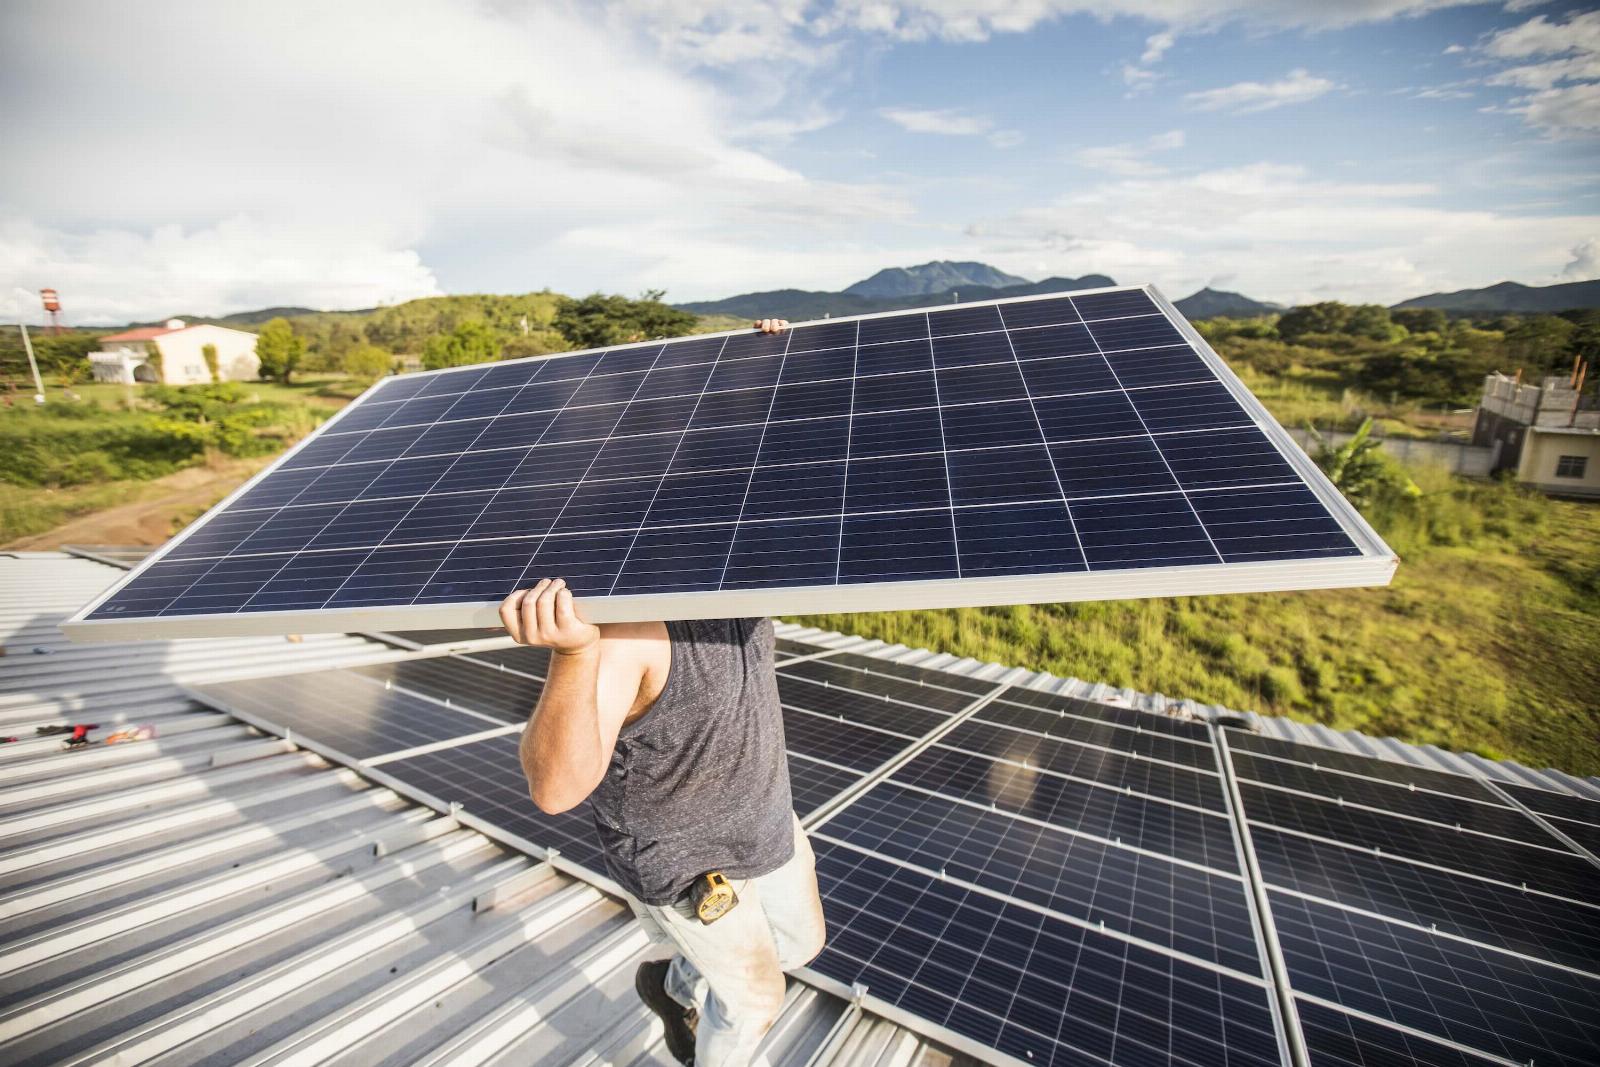 Two former CloudKitchens execs are tackling Mexico’s solar power lag